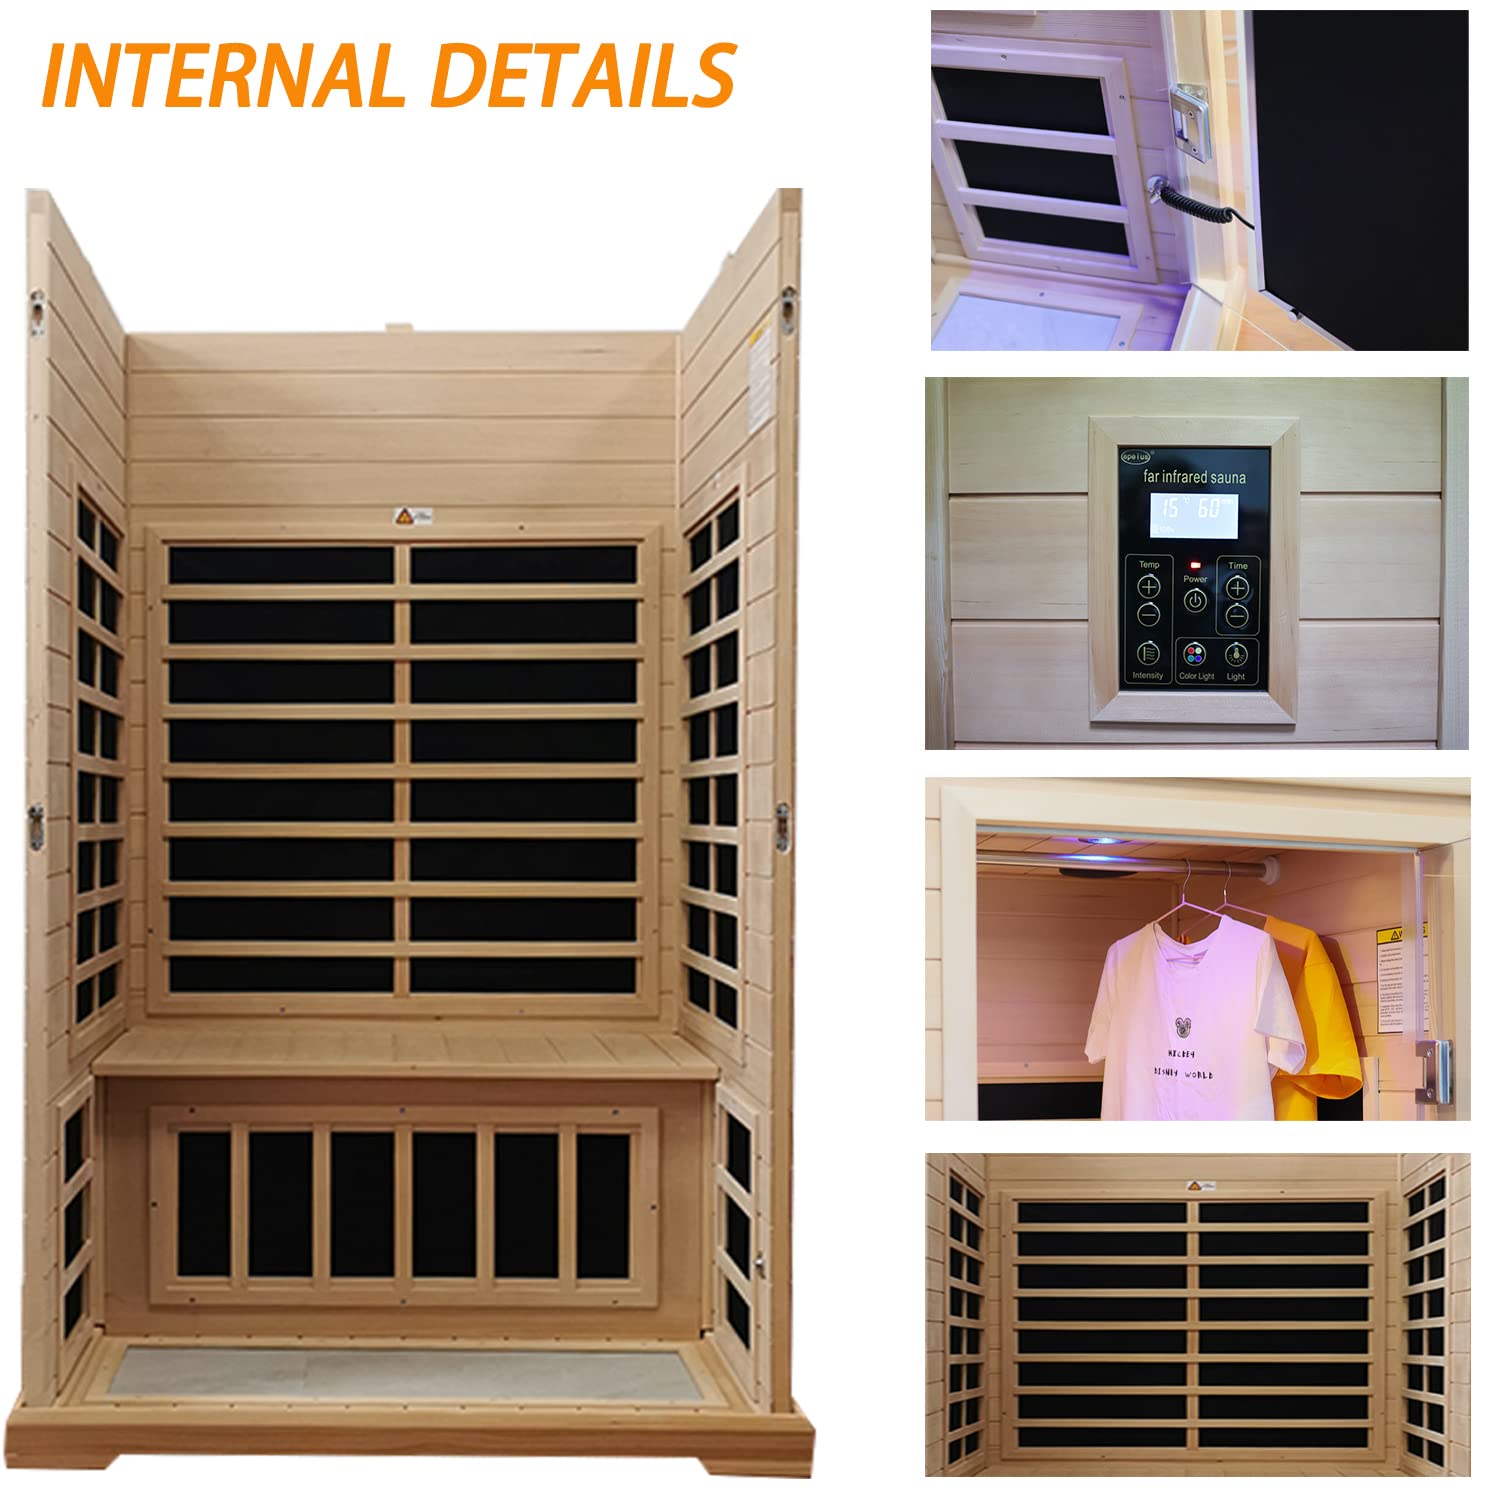 LTCCDSS 2 Person Infrared Sauna, Hemlock Wooden Far Infrared Sauna for Home, with 1750W, 9 Low EMF Heaters 2 Bluetooth Speakers, 1 LED Reading Lamp and 2 Color Lights Sauna Room